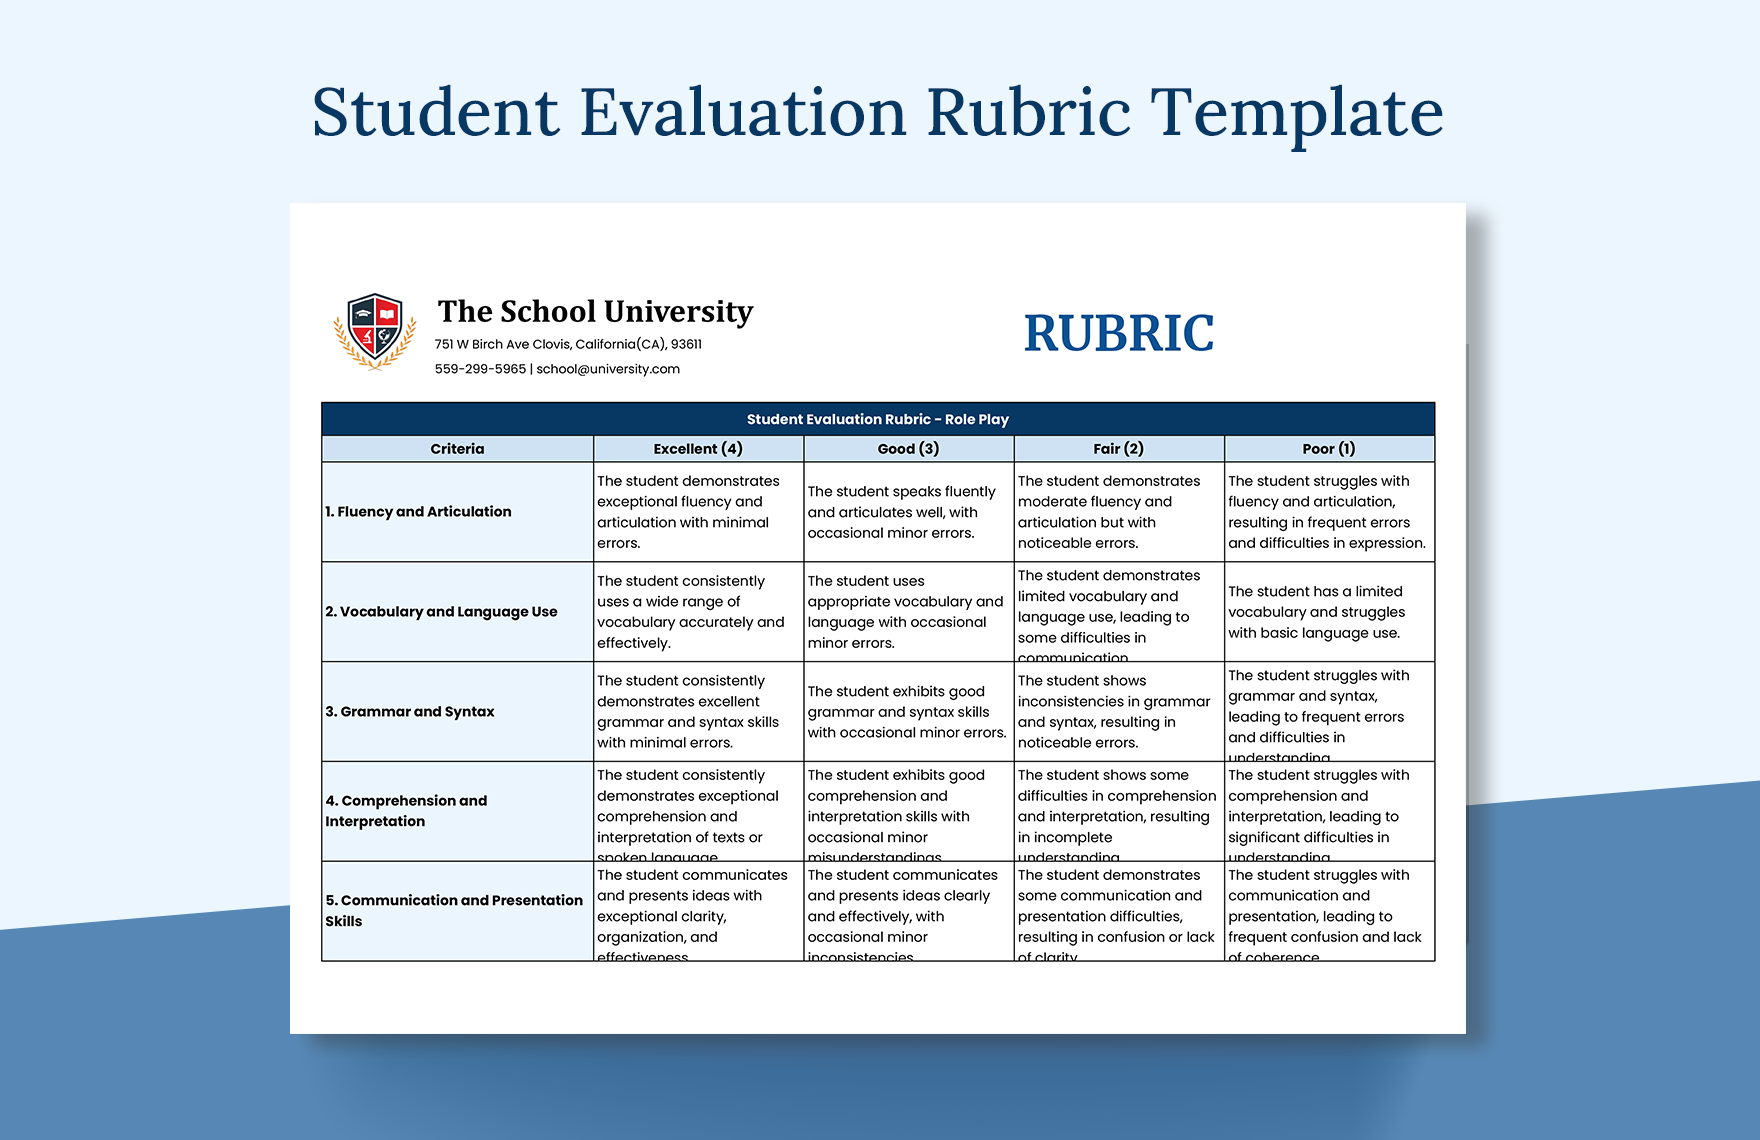 Student Evaluation Rubric Template